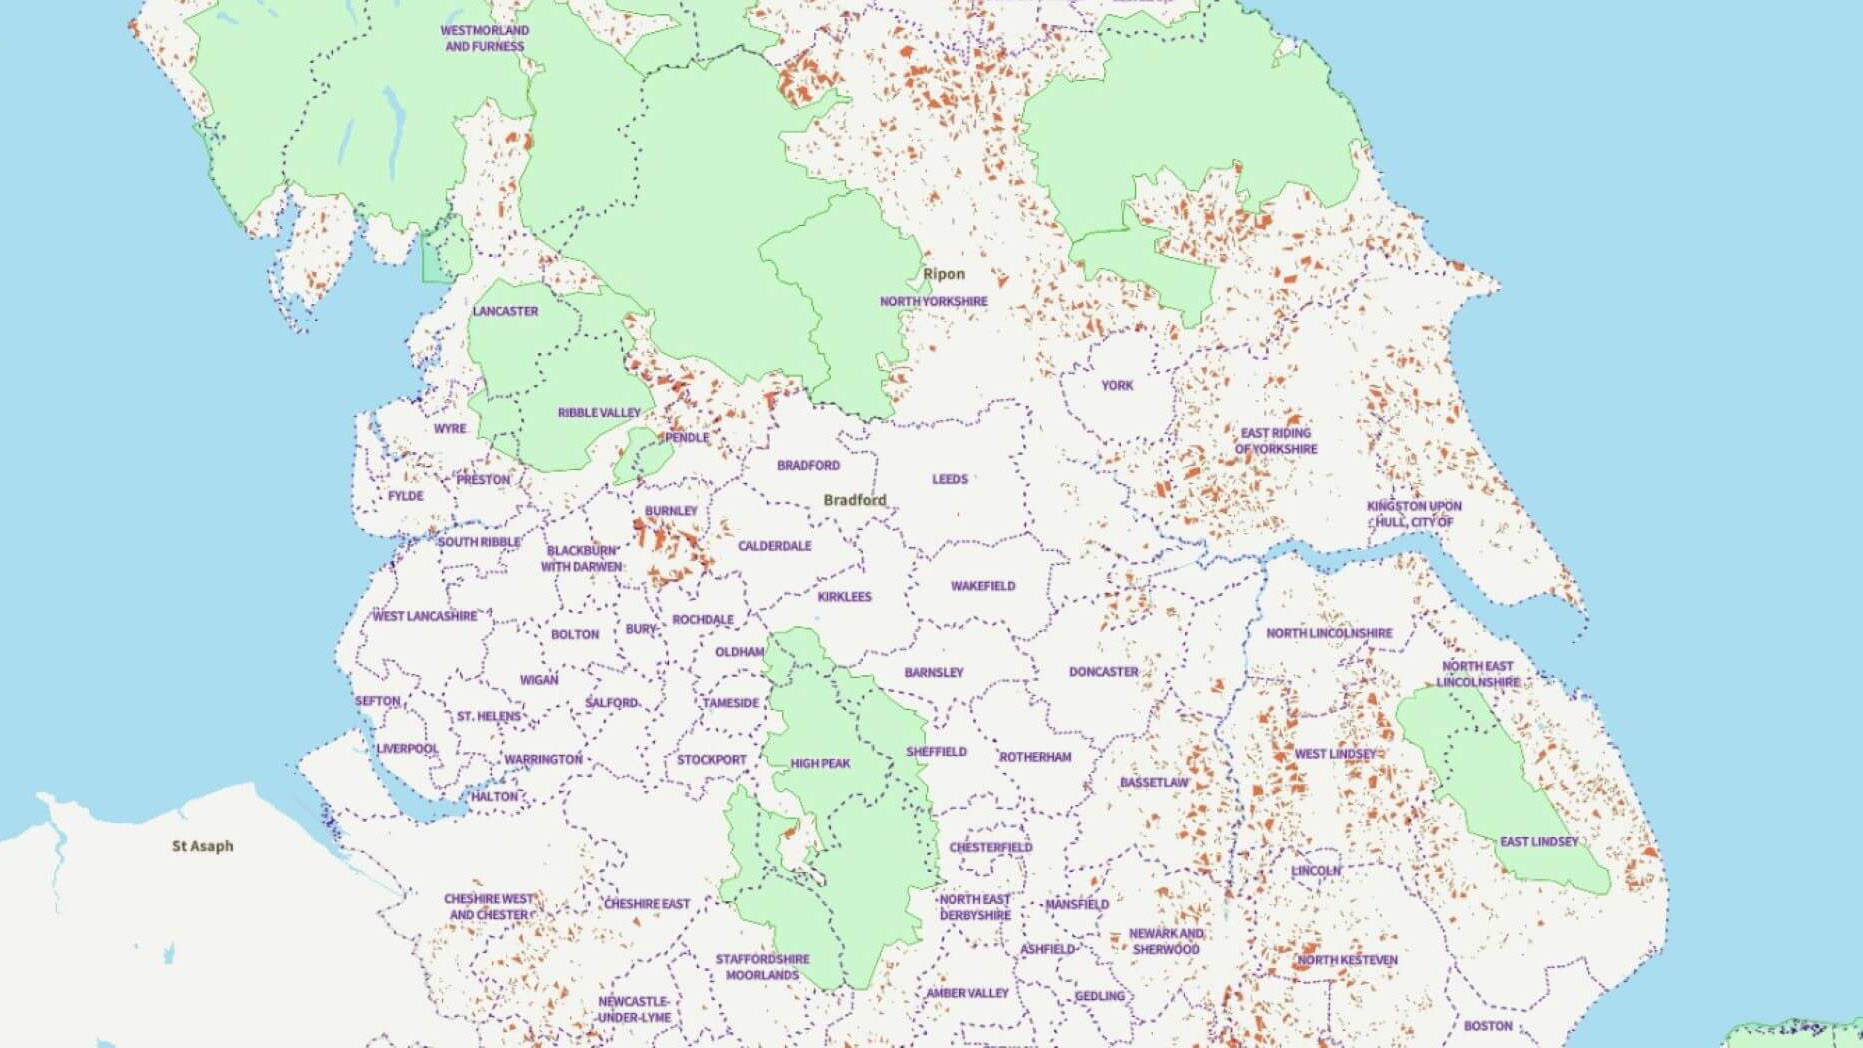 Map of Northern England showing potential solar development areas